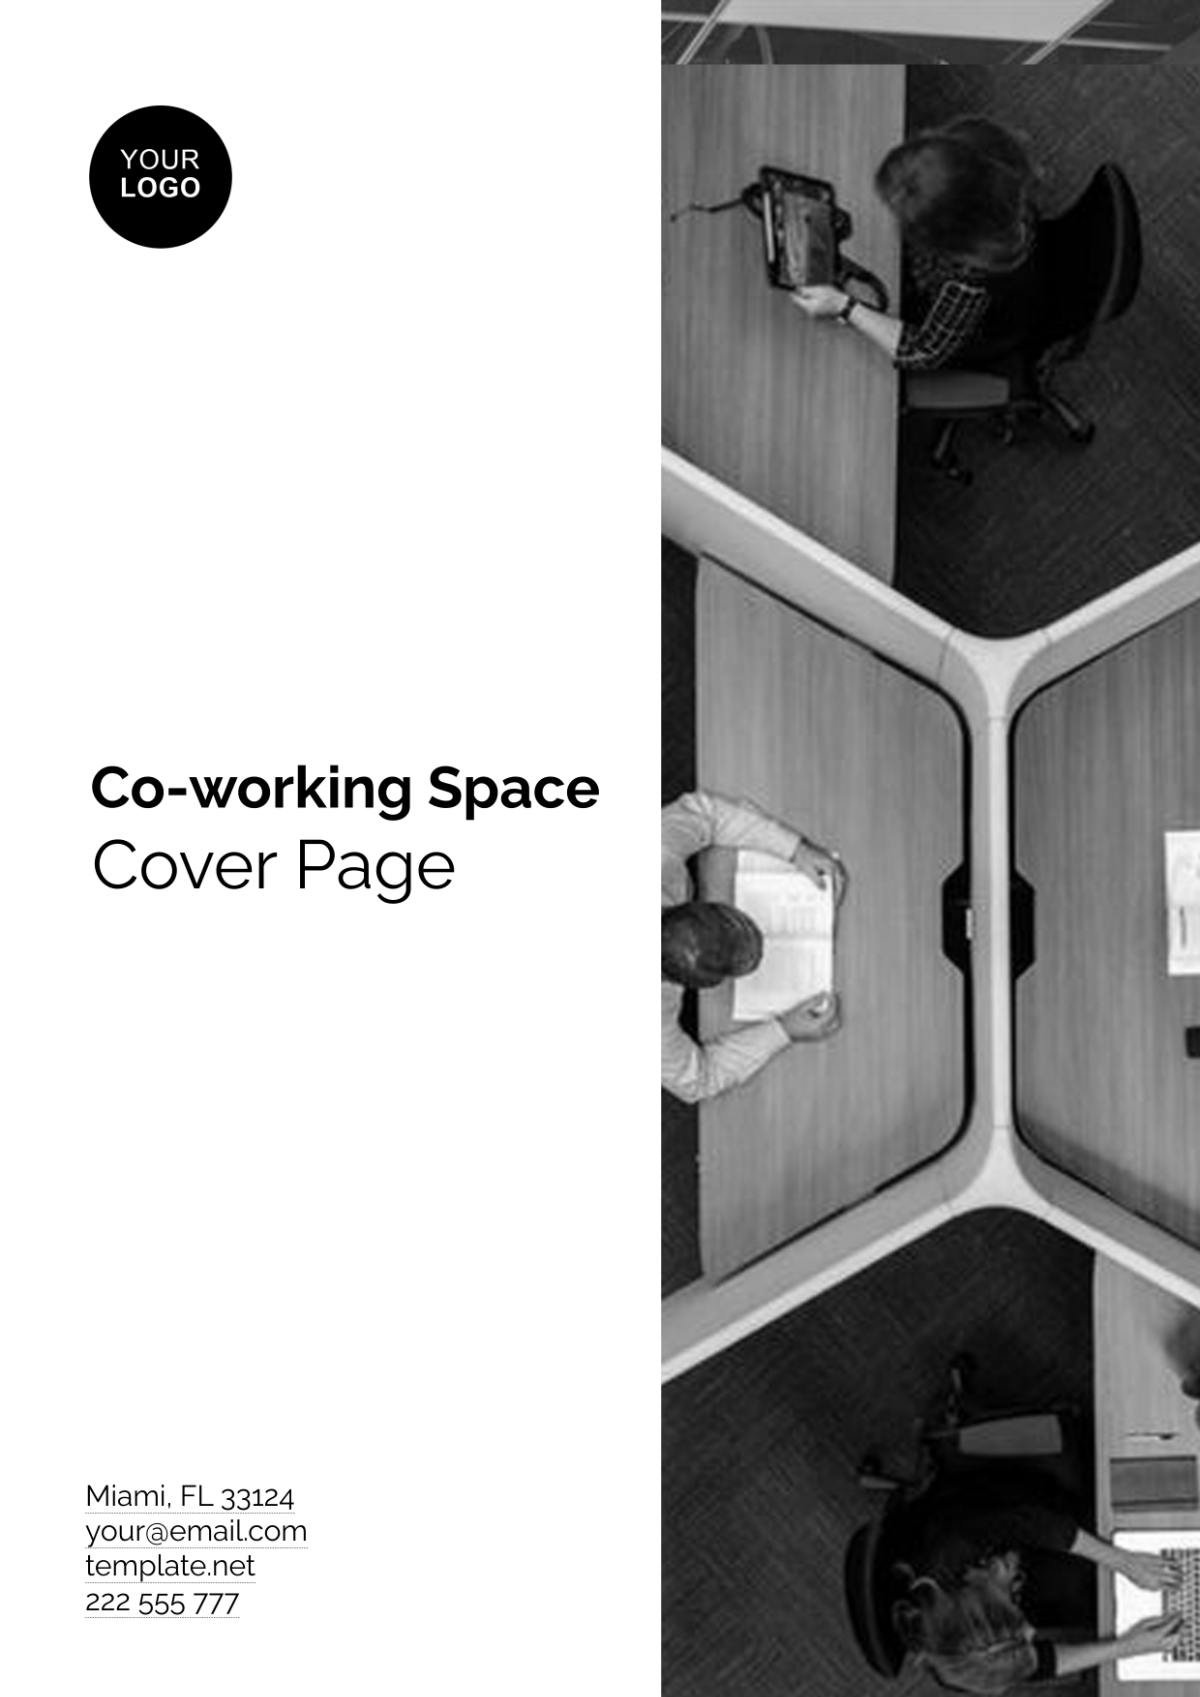 Co-working Space Cover Page Address Template